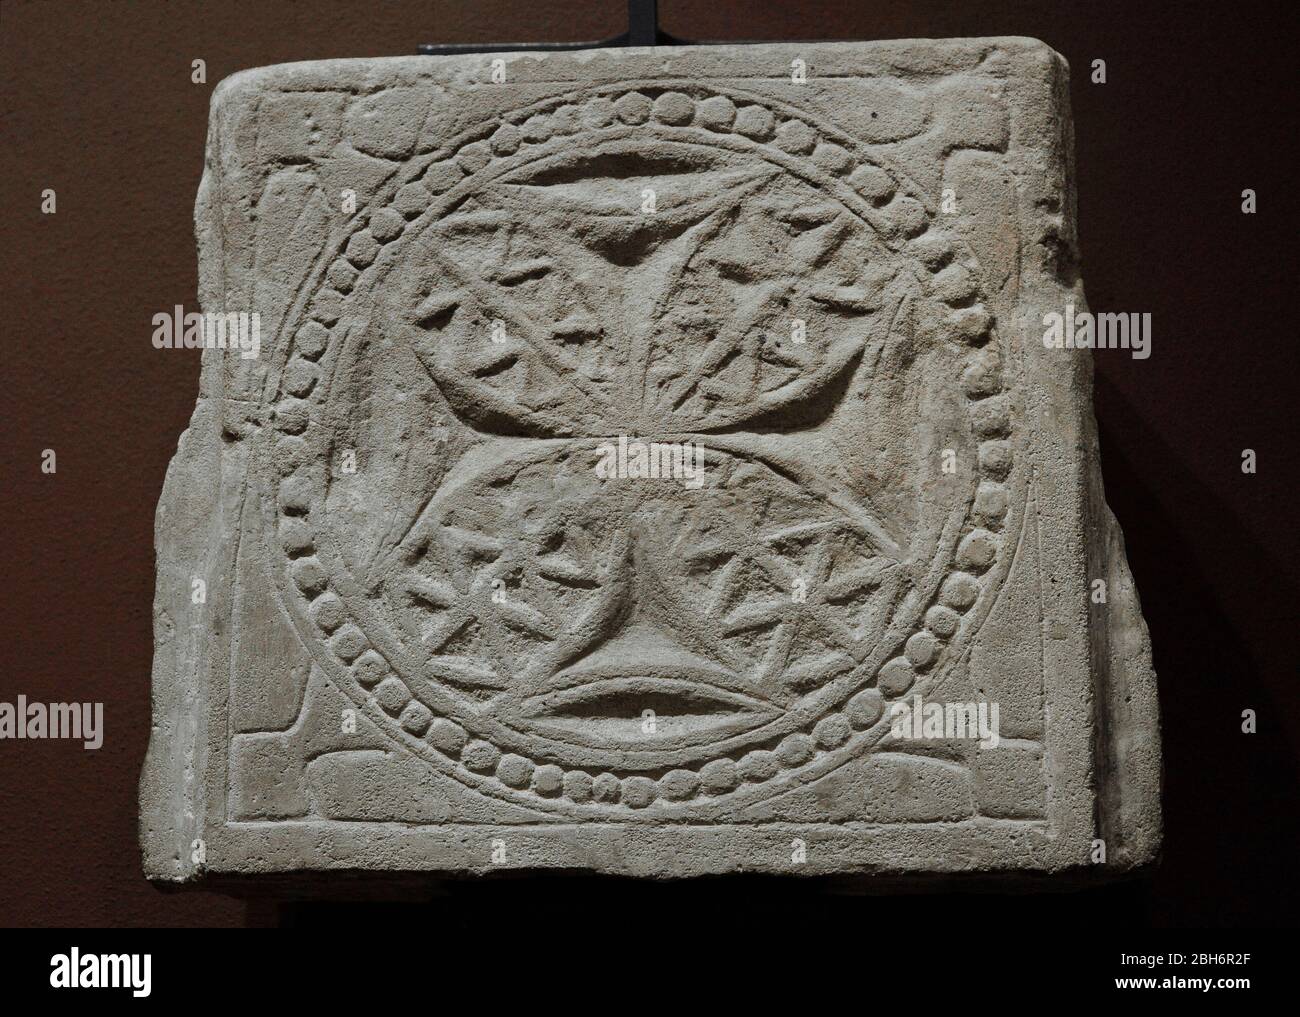 Fragment of door lintel. 2nd half of 7th-1st half of 8th centuries. Sandstone. From Faras Cathedral (Sudan). Faras Gallery. National Museum. Warsaw. Poland. Stock Photo